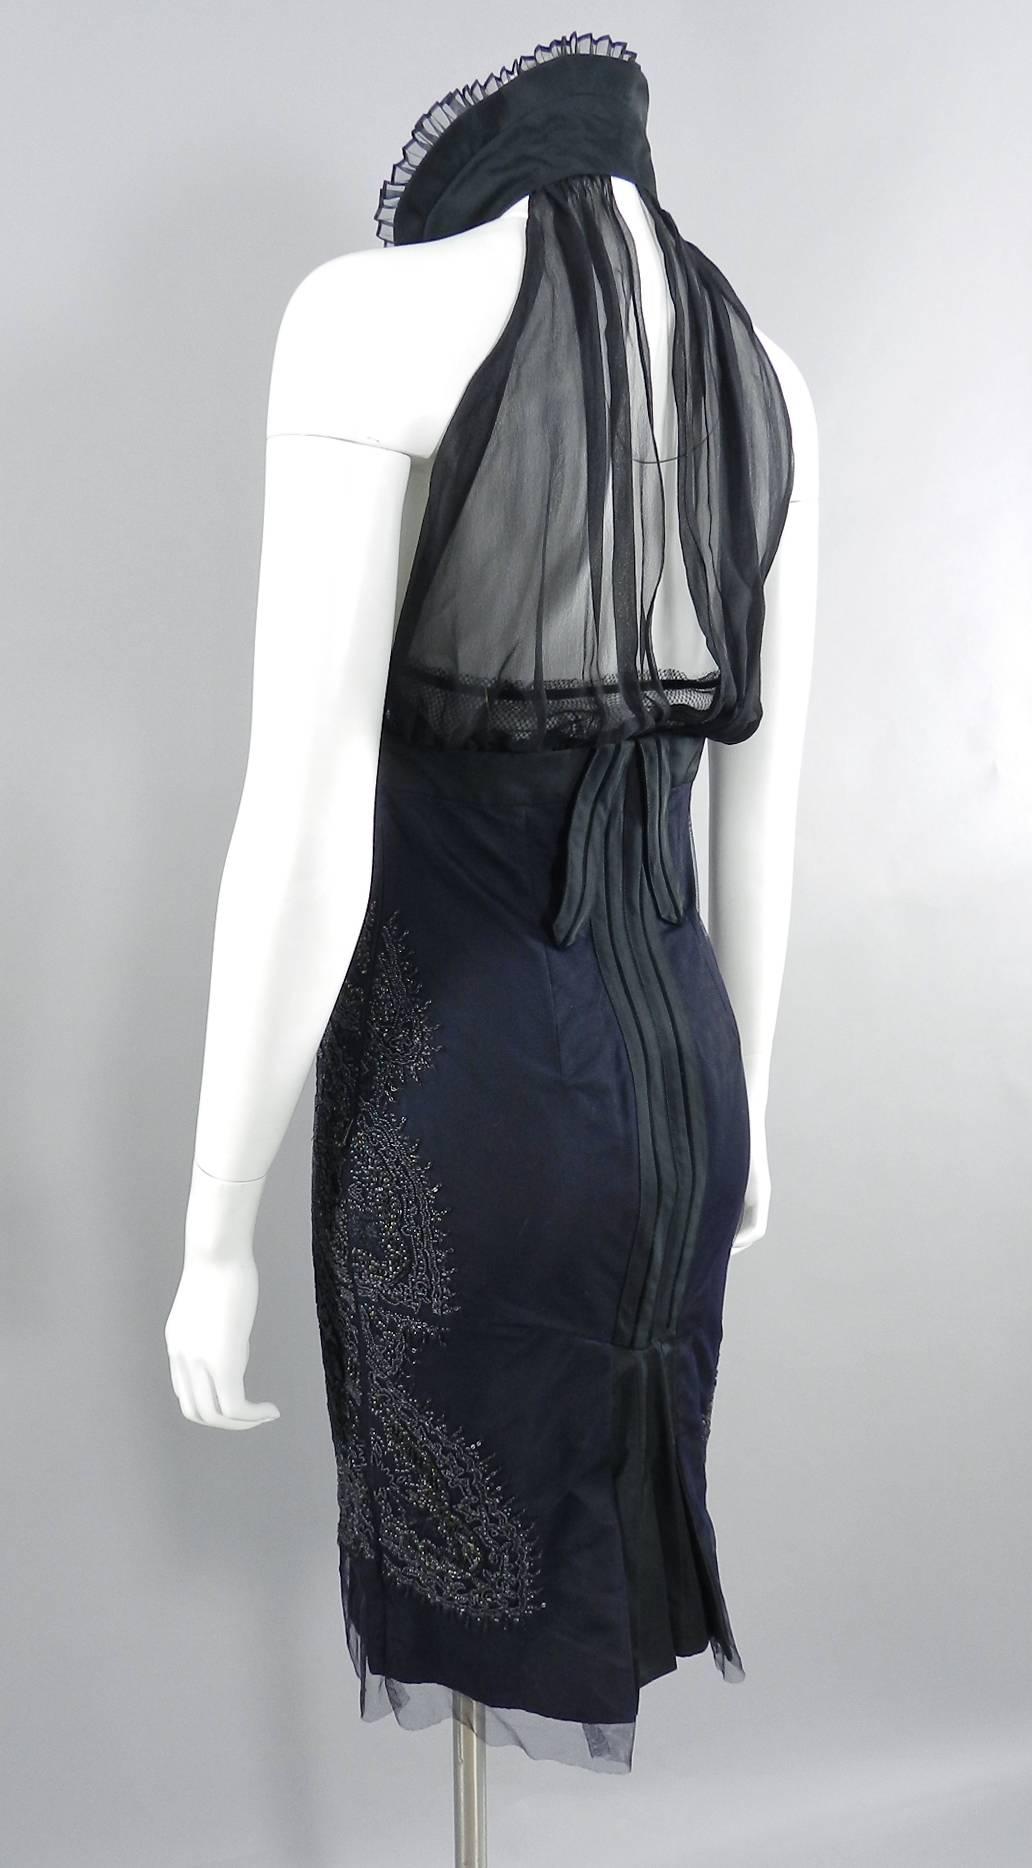 Gucci by Tom Ford runway Beaded Dress, A/W 2005  In Excellent Condition For Sale In Toronto, ON